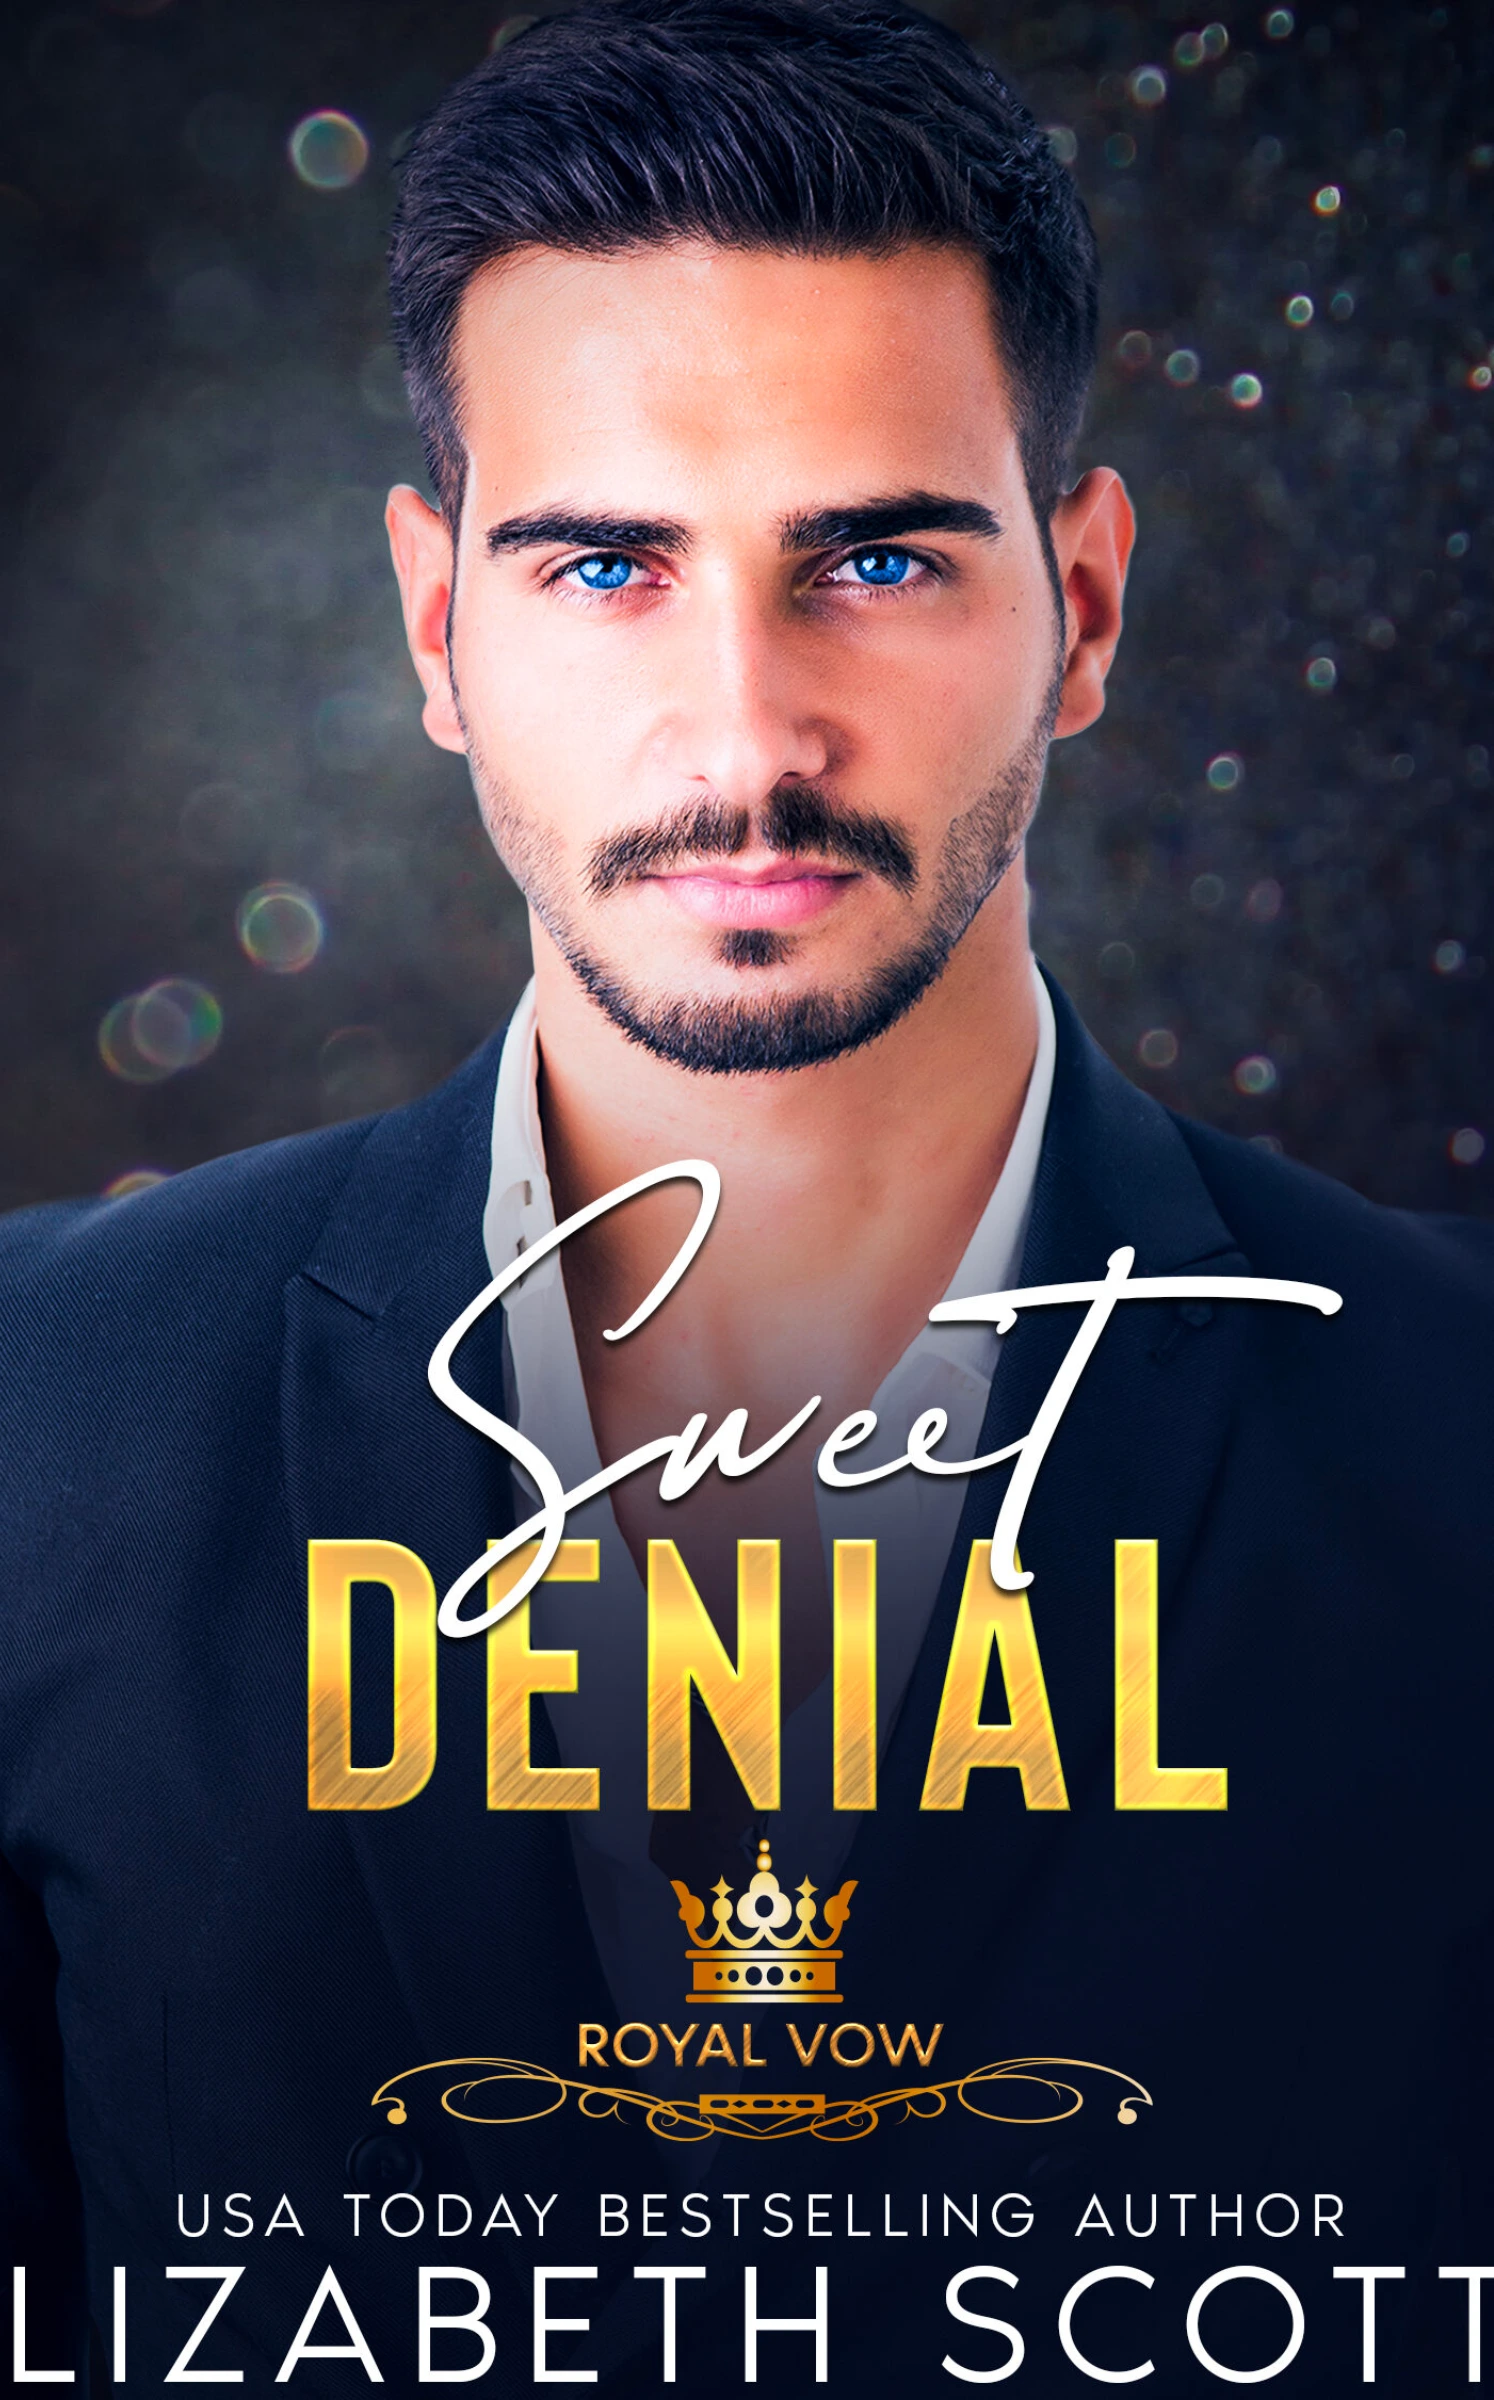 Sweet Denial: The Royal Vow Series by USA Today Bestselling author of contemporary romance Lizabeth Scott.